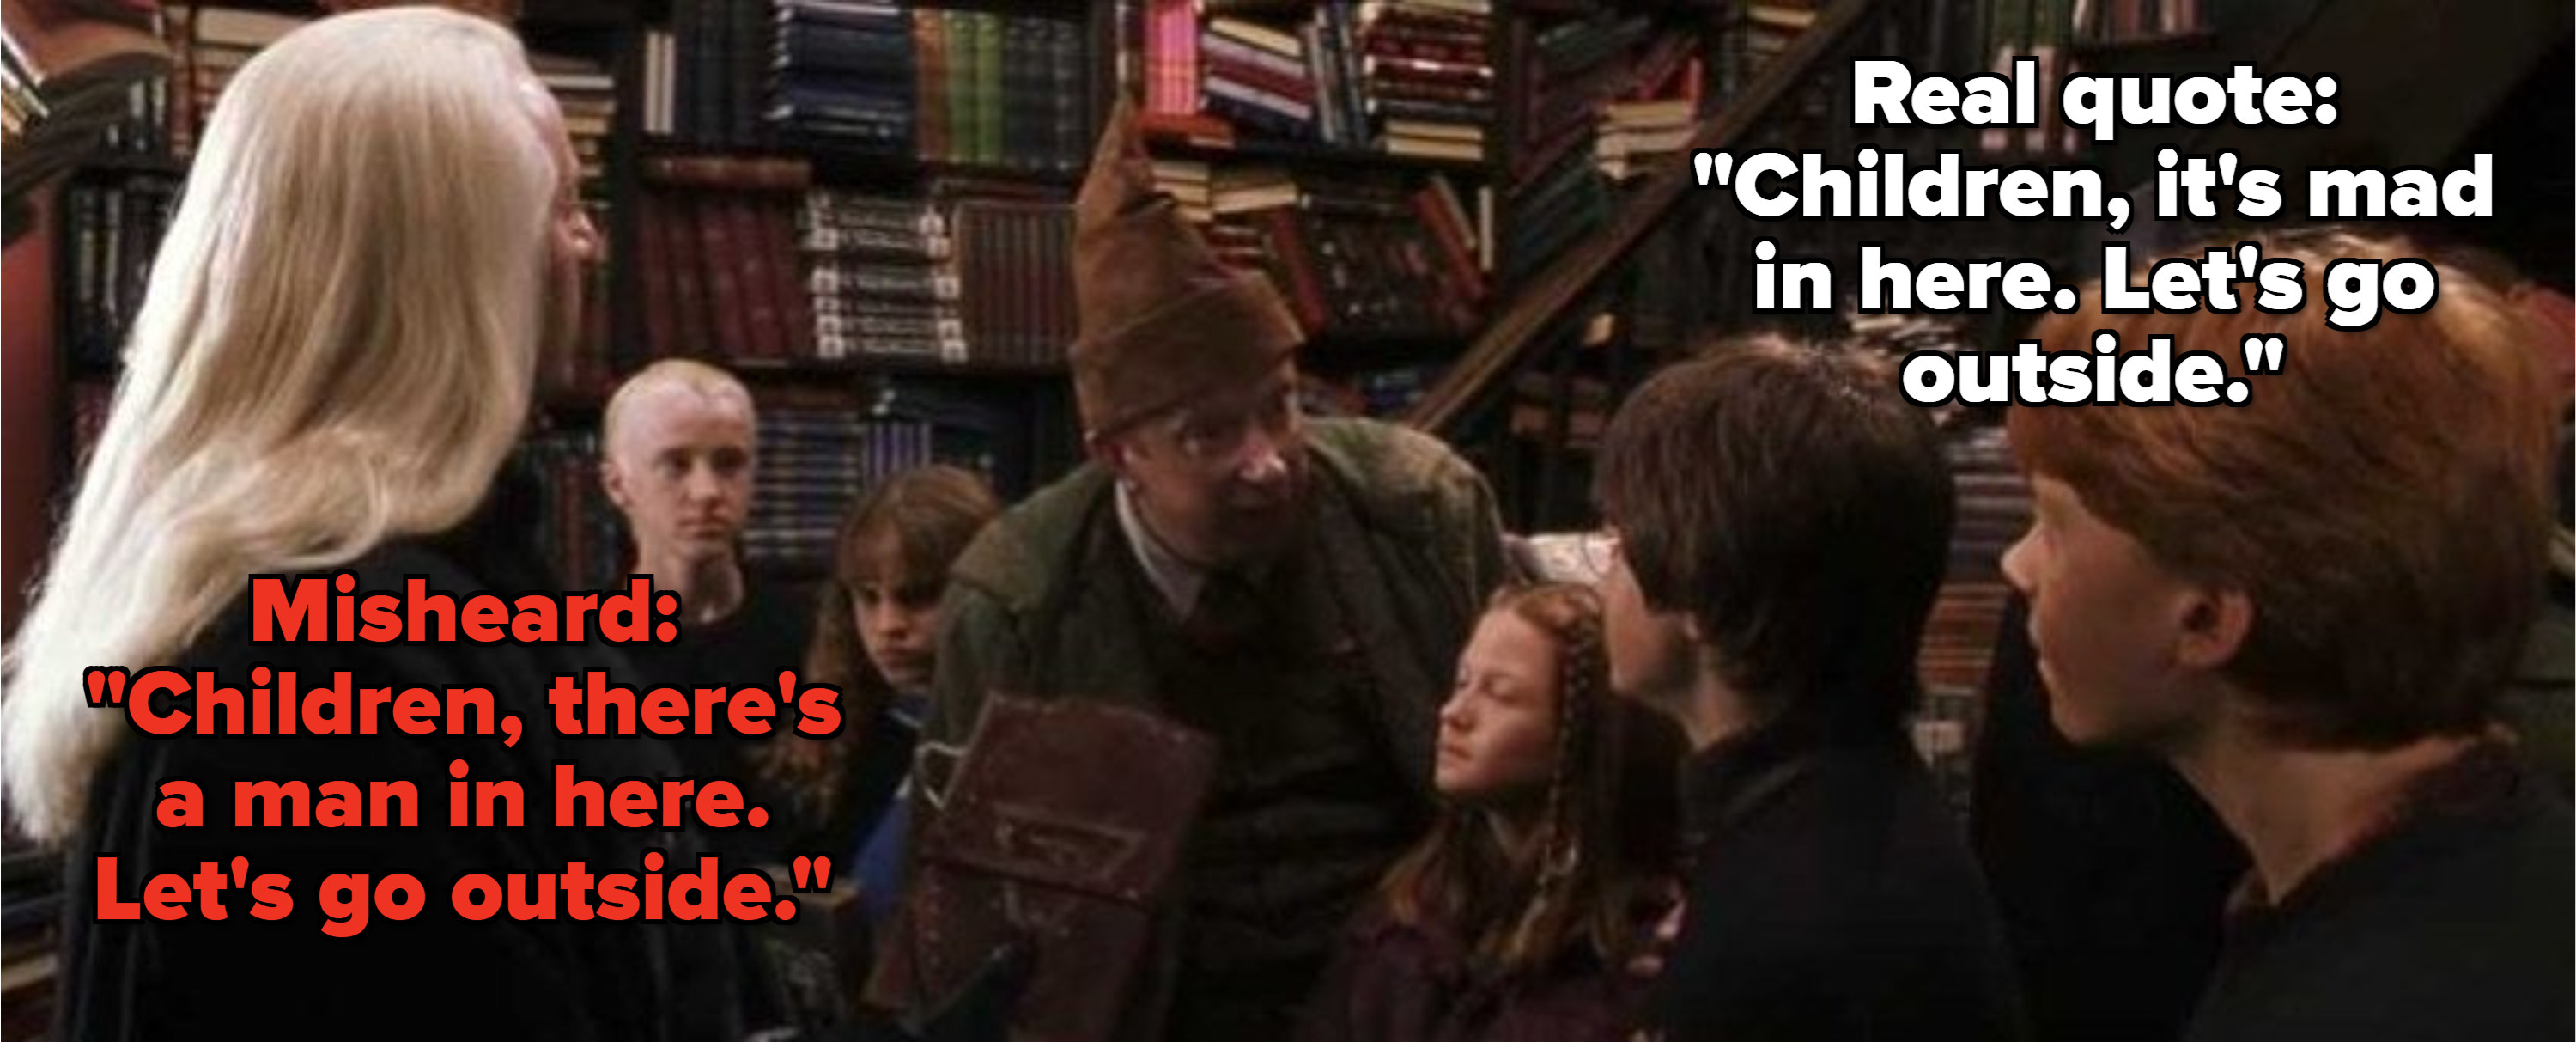 Mr. Weasley talking to Harry Potter and other kids